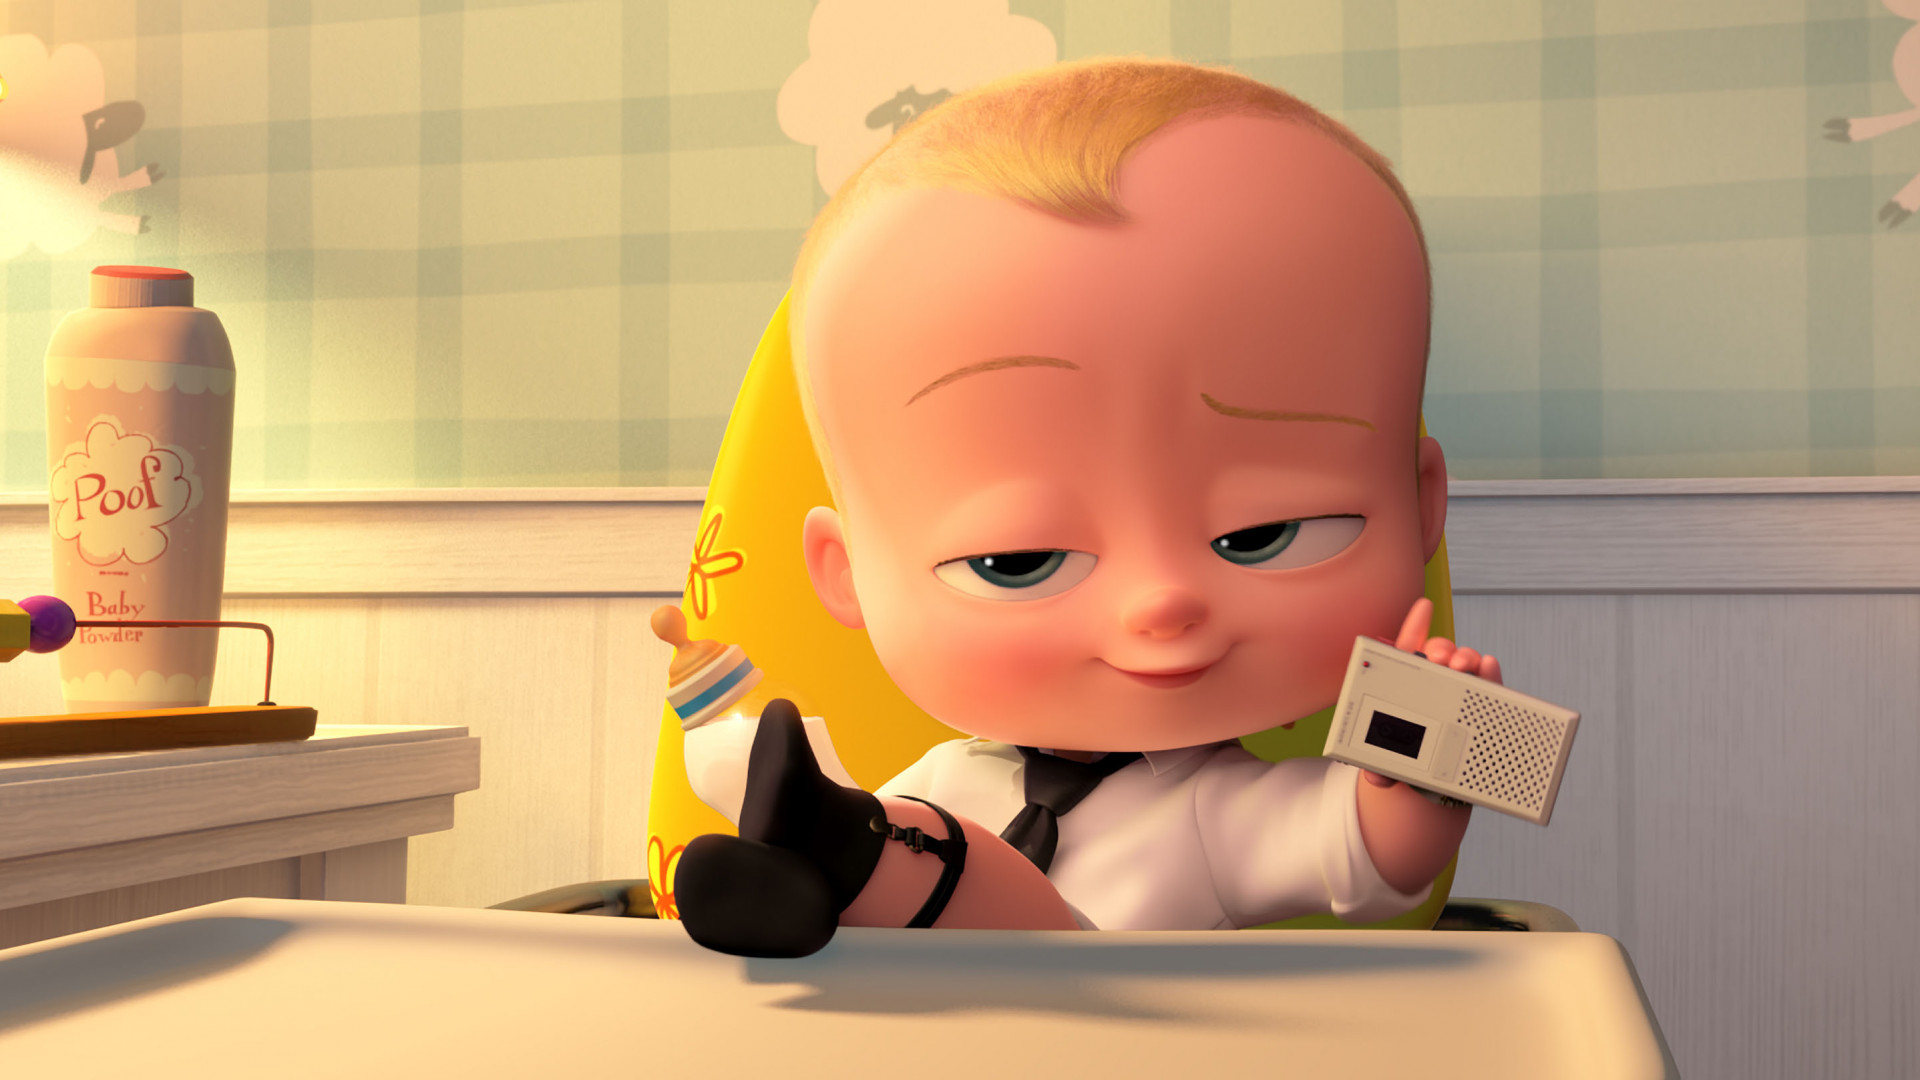 Wallpaper The Boss Baby, Baby, best animation movies ...